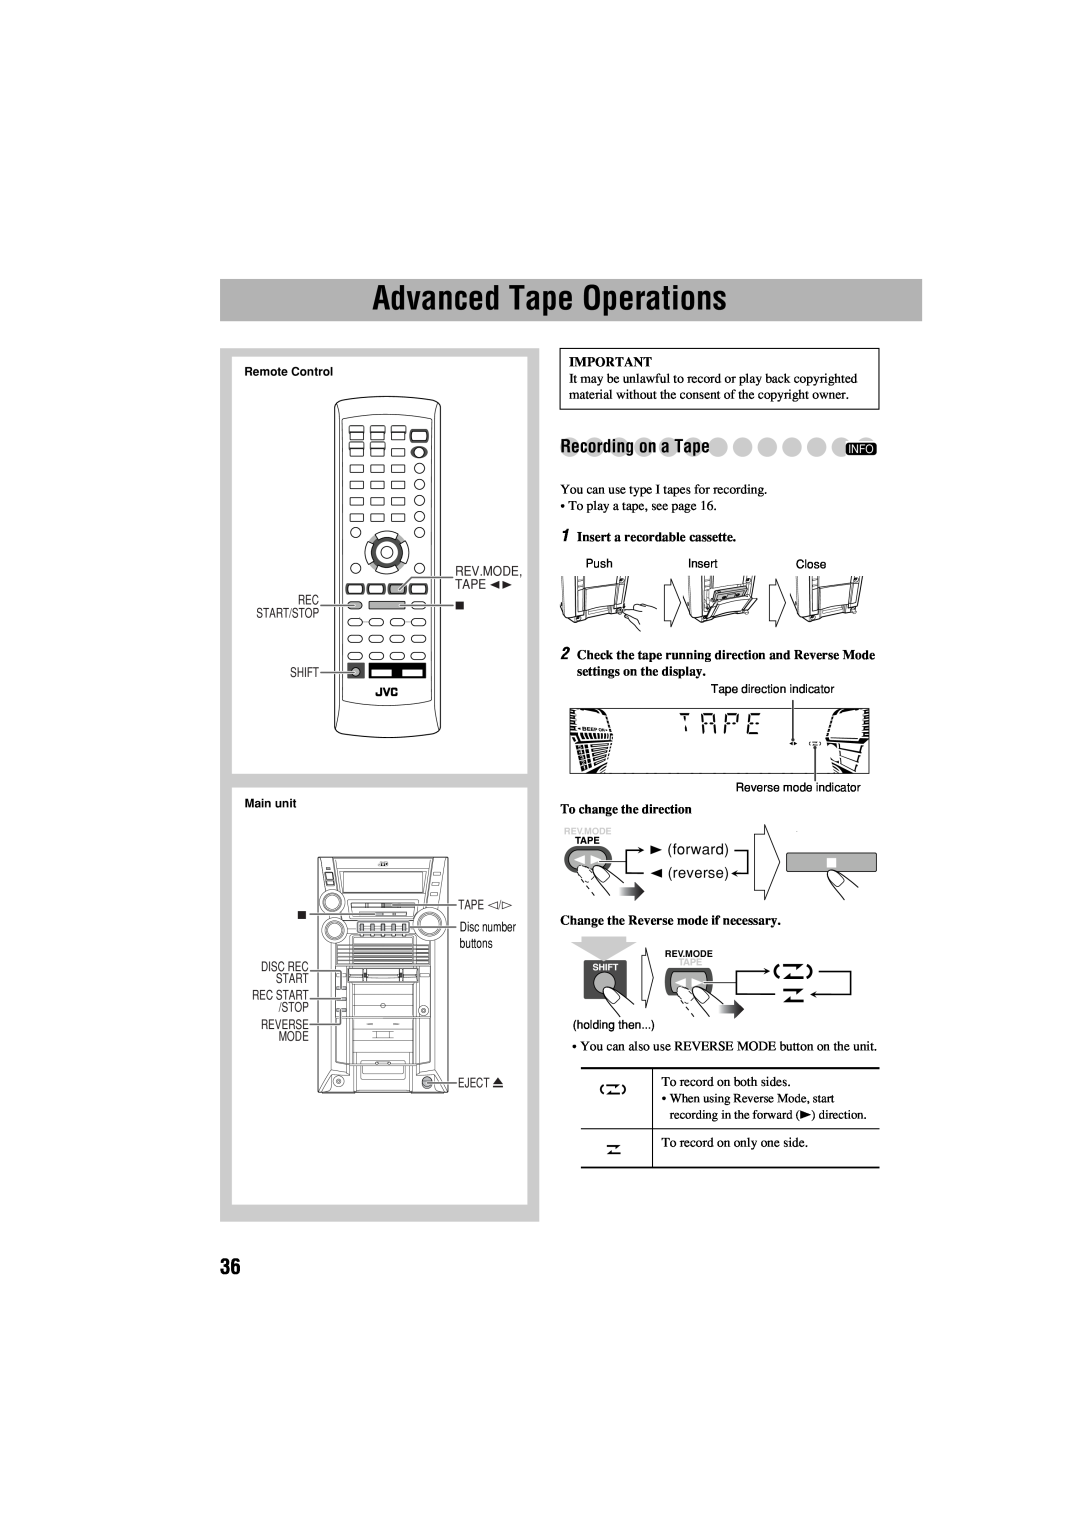 JVC GVT0125-003A Advanced Tape Operations, Recording on a Tape, forward 2 reverse, Rev.Mode Tape, Shift, Tape @/#, Eject 